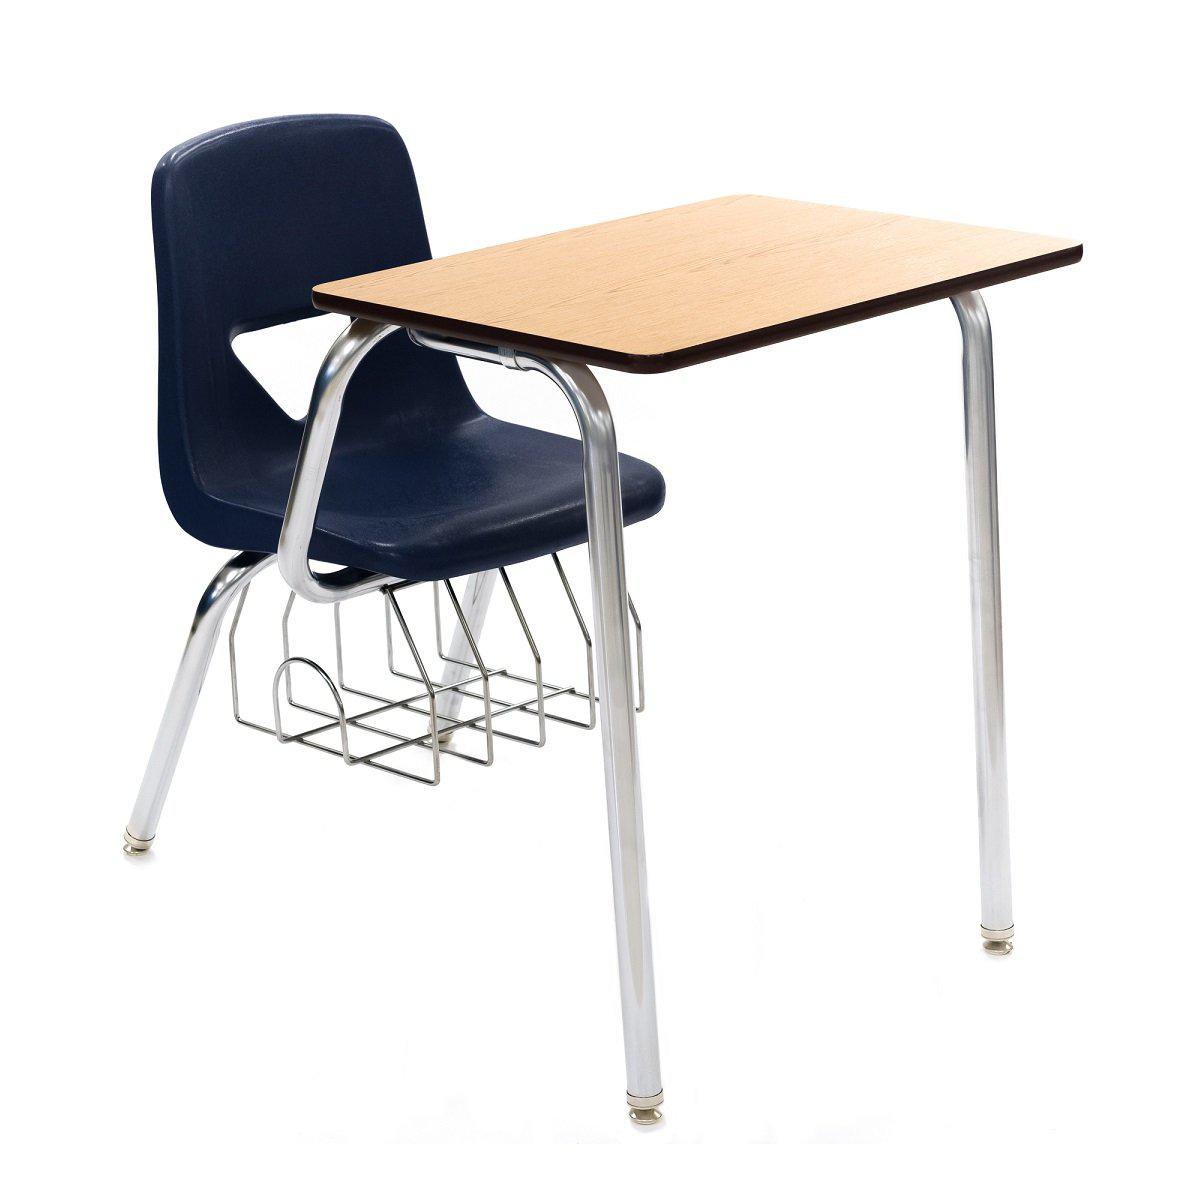 620 Series Combo Desk, 15-1/2" Seat Height, High-Pressure Laminate Top, with Bookbasket